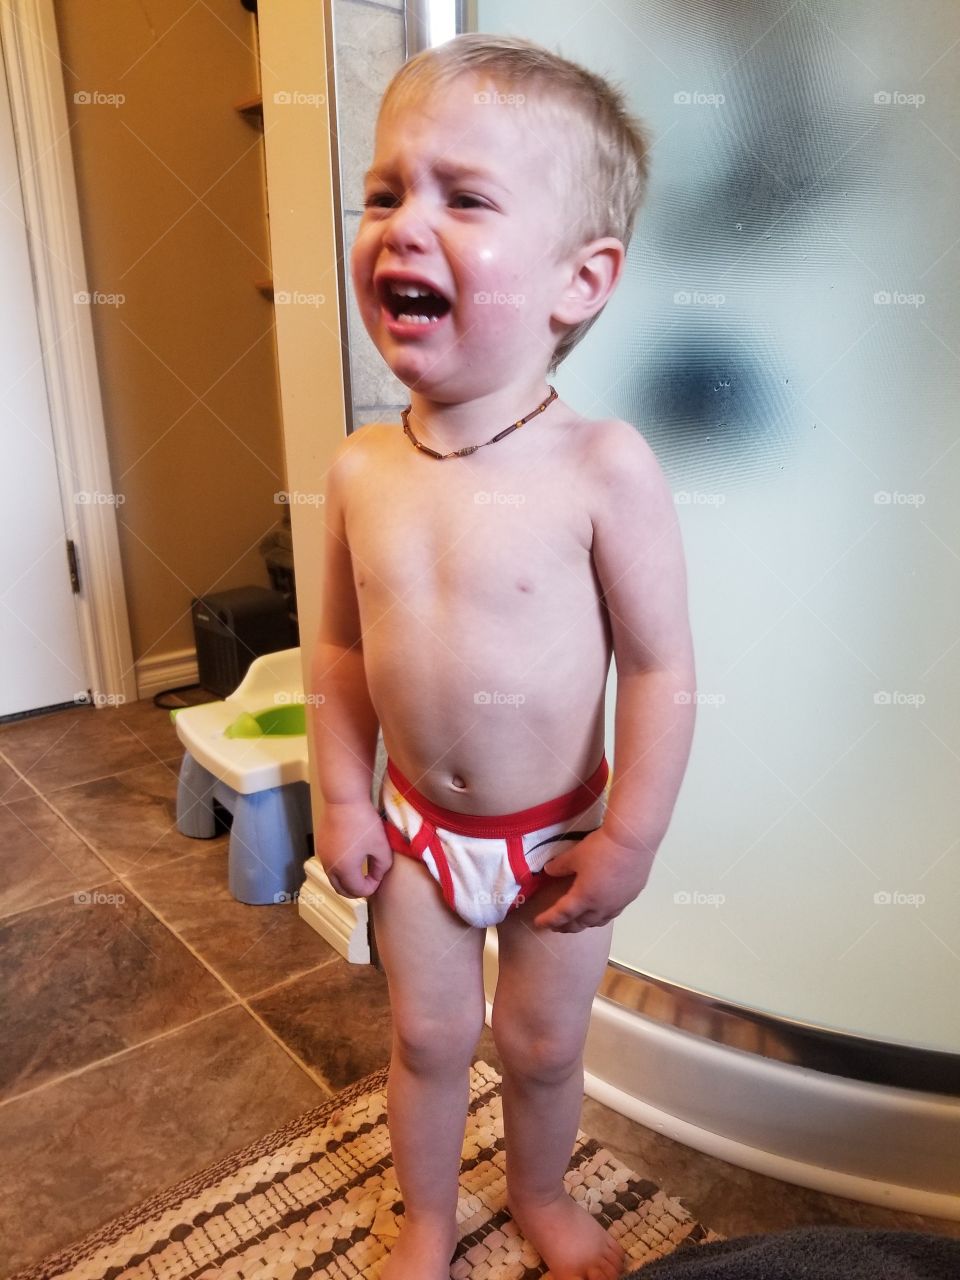 Cute little boy angry by new undies learning to potty train